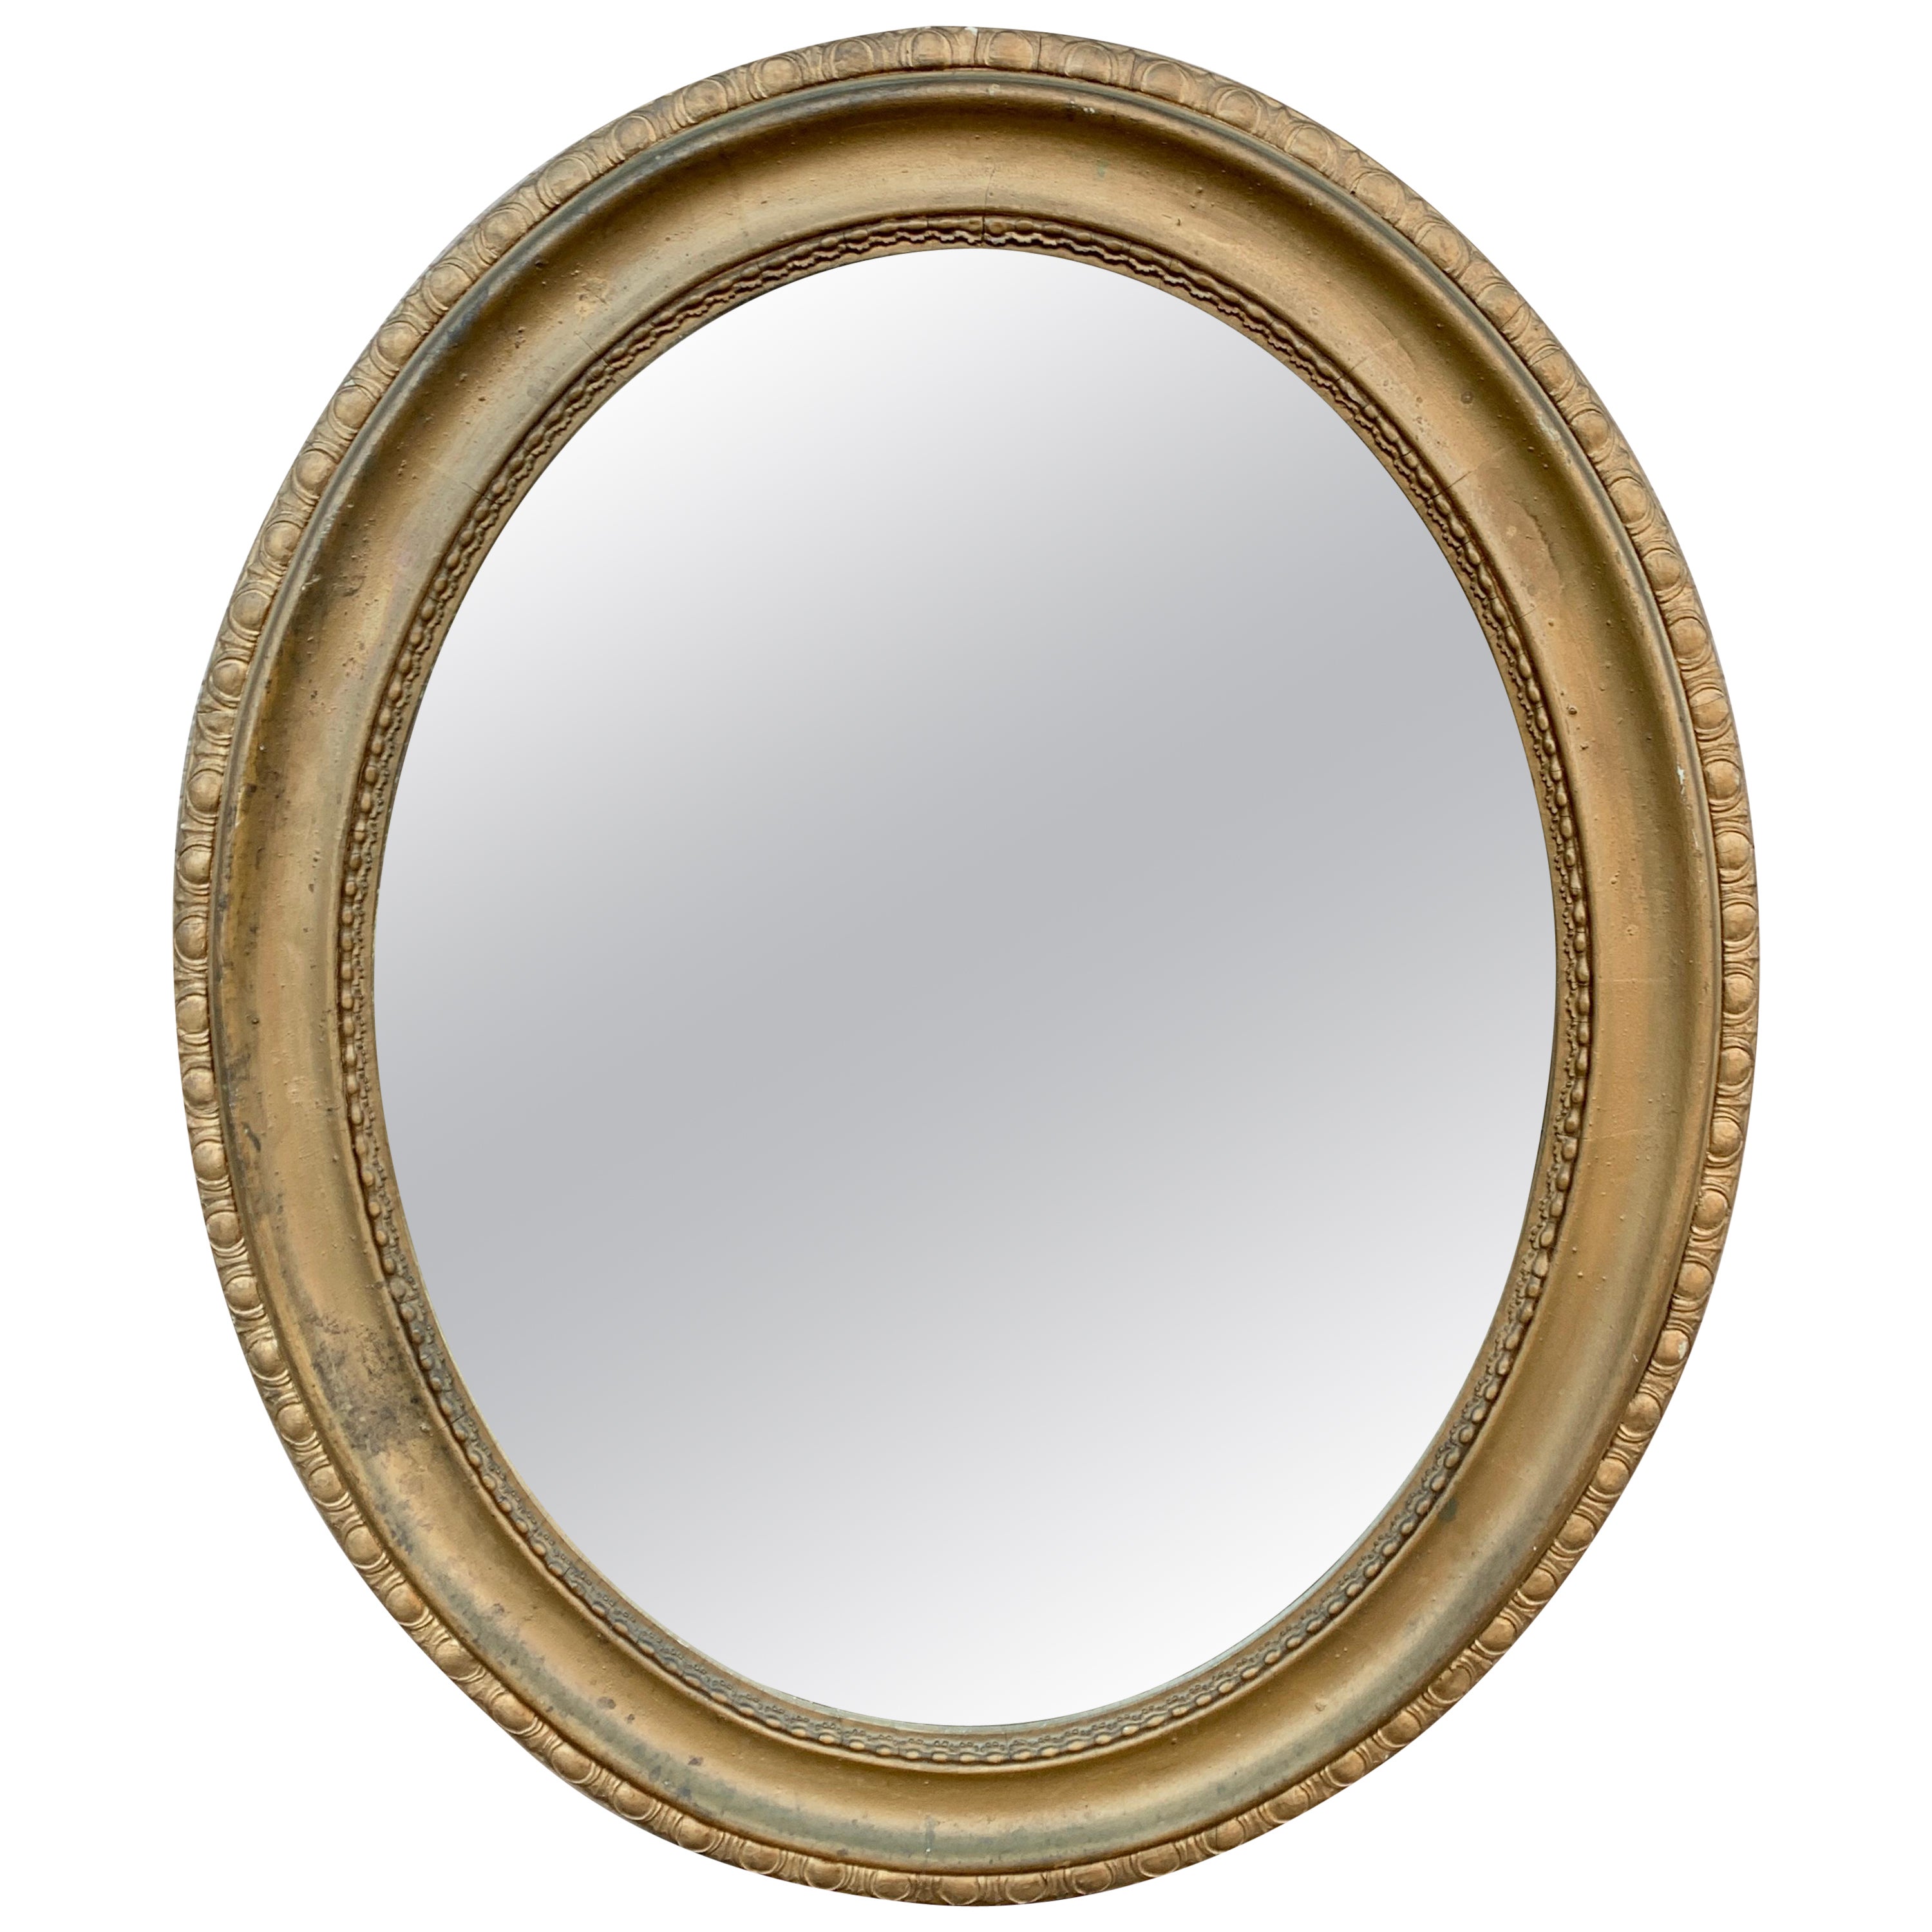 Antique Italian Giltwood Oval Mirror, Early 20th Century